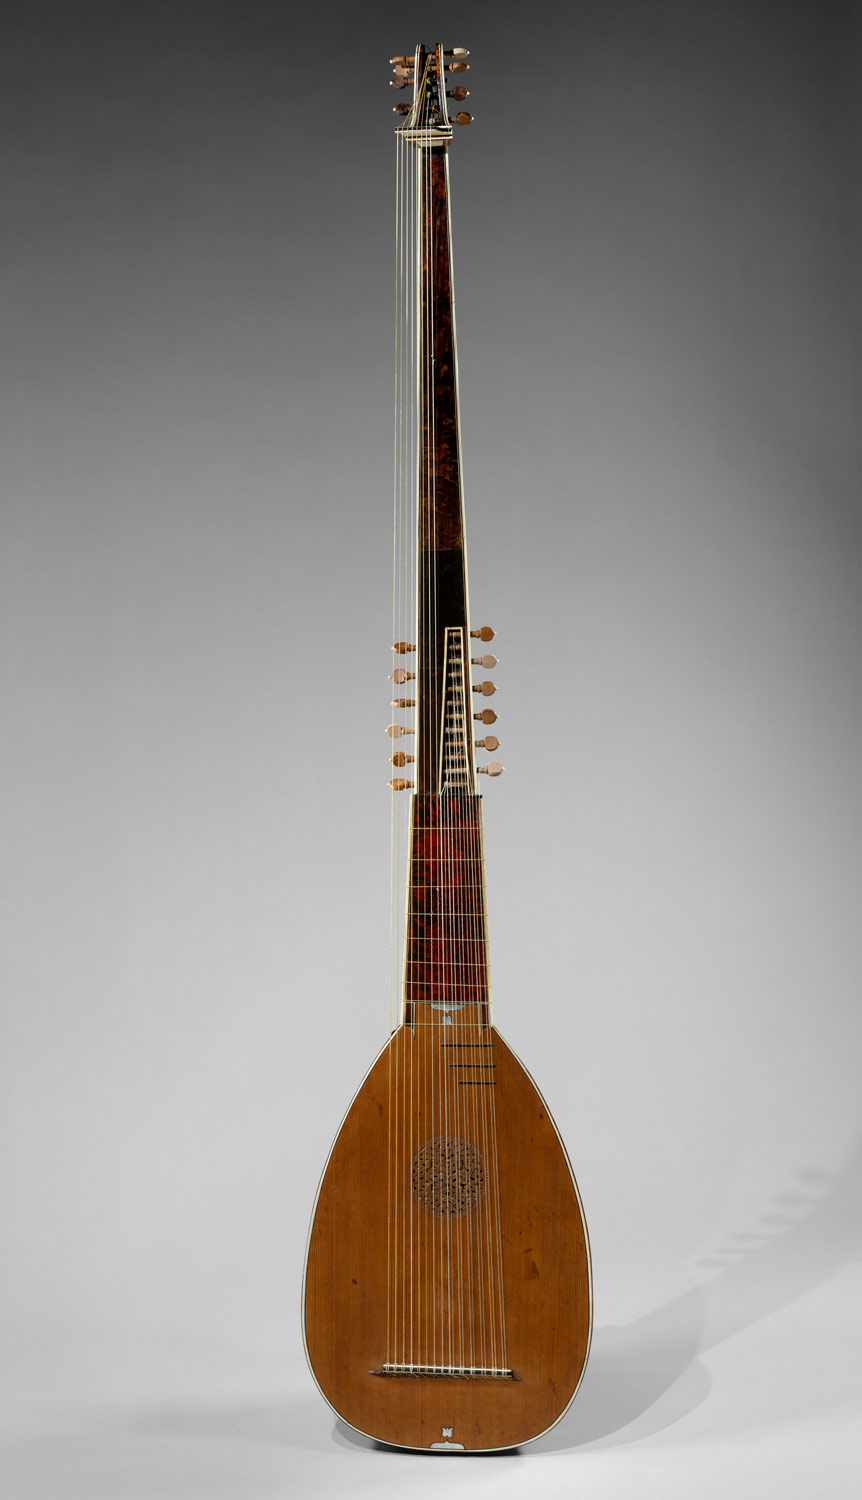 instruments like a lute